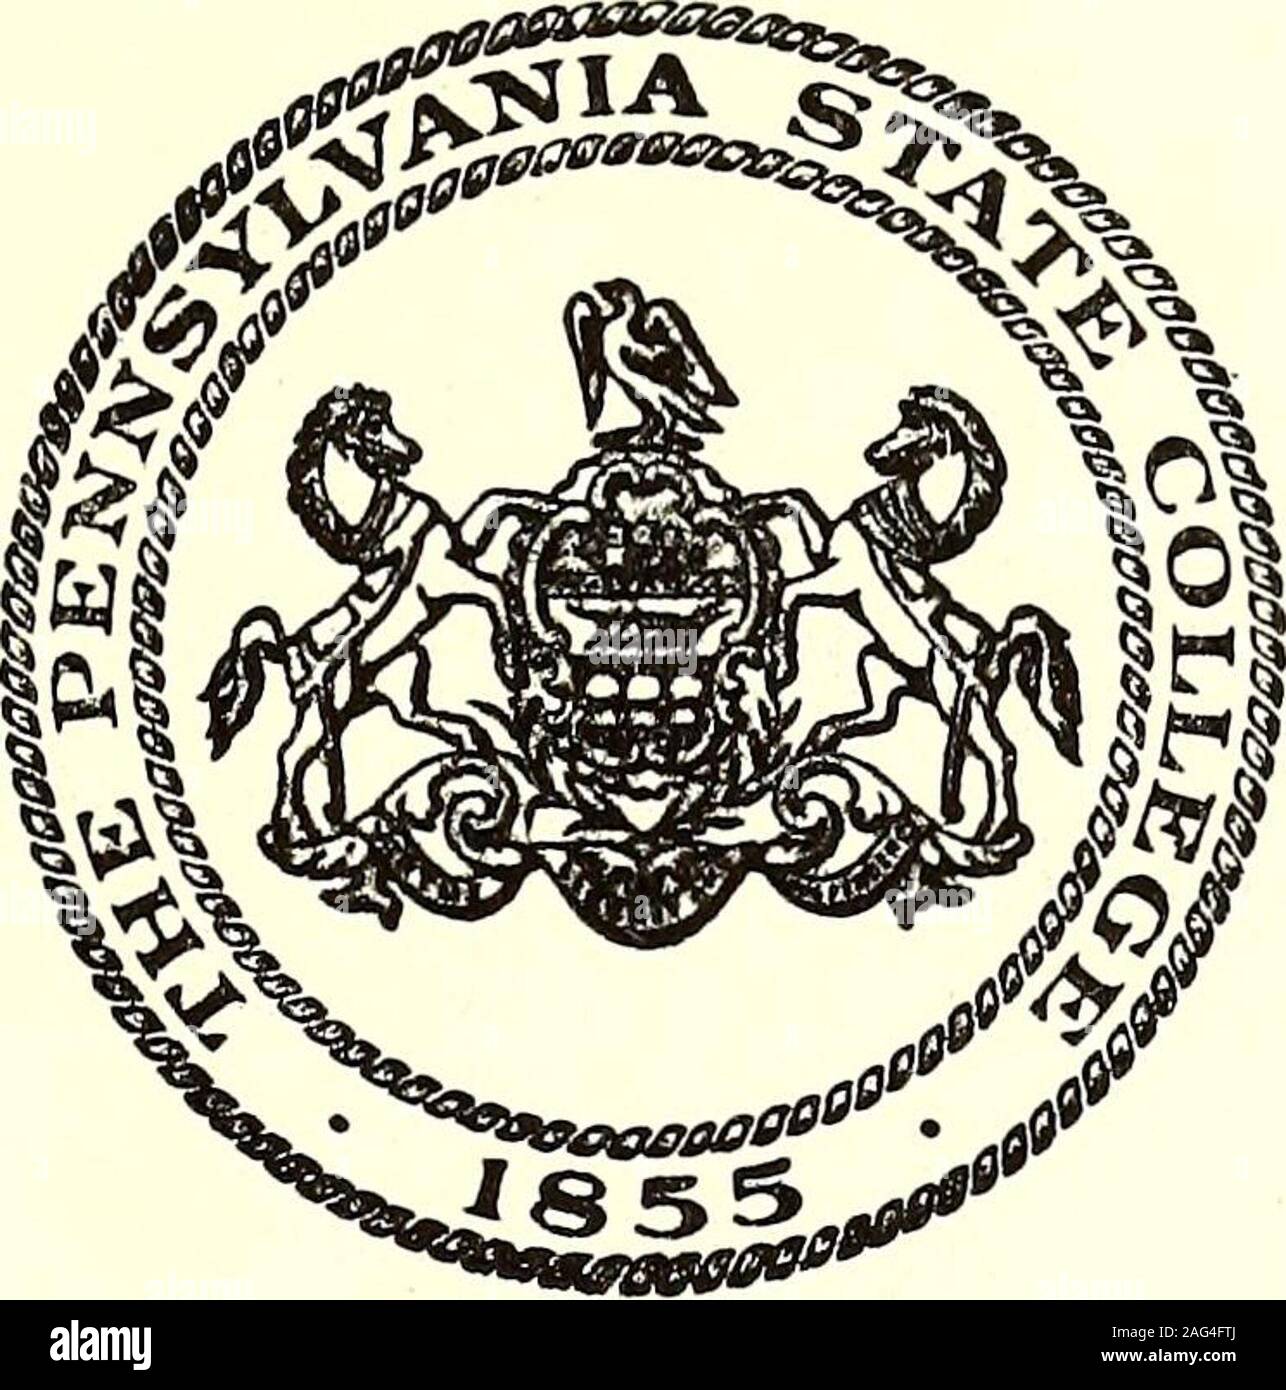 Graduate degree programs. GRADUATESCHOOL 1952 1953 «*W STATE COLLECTION THE  PENNSYLVANIA STATE COLLEGE BULLETIN VOLUME XLVI January 11, 1952 NUMBER 2  Published weekly from January to August inclusive and monthly from